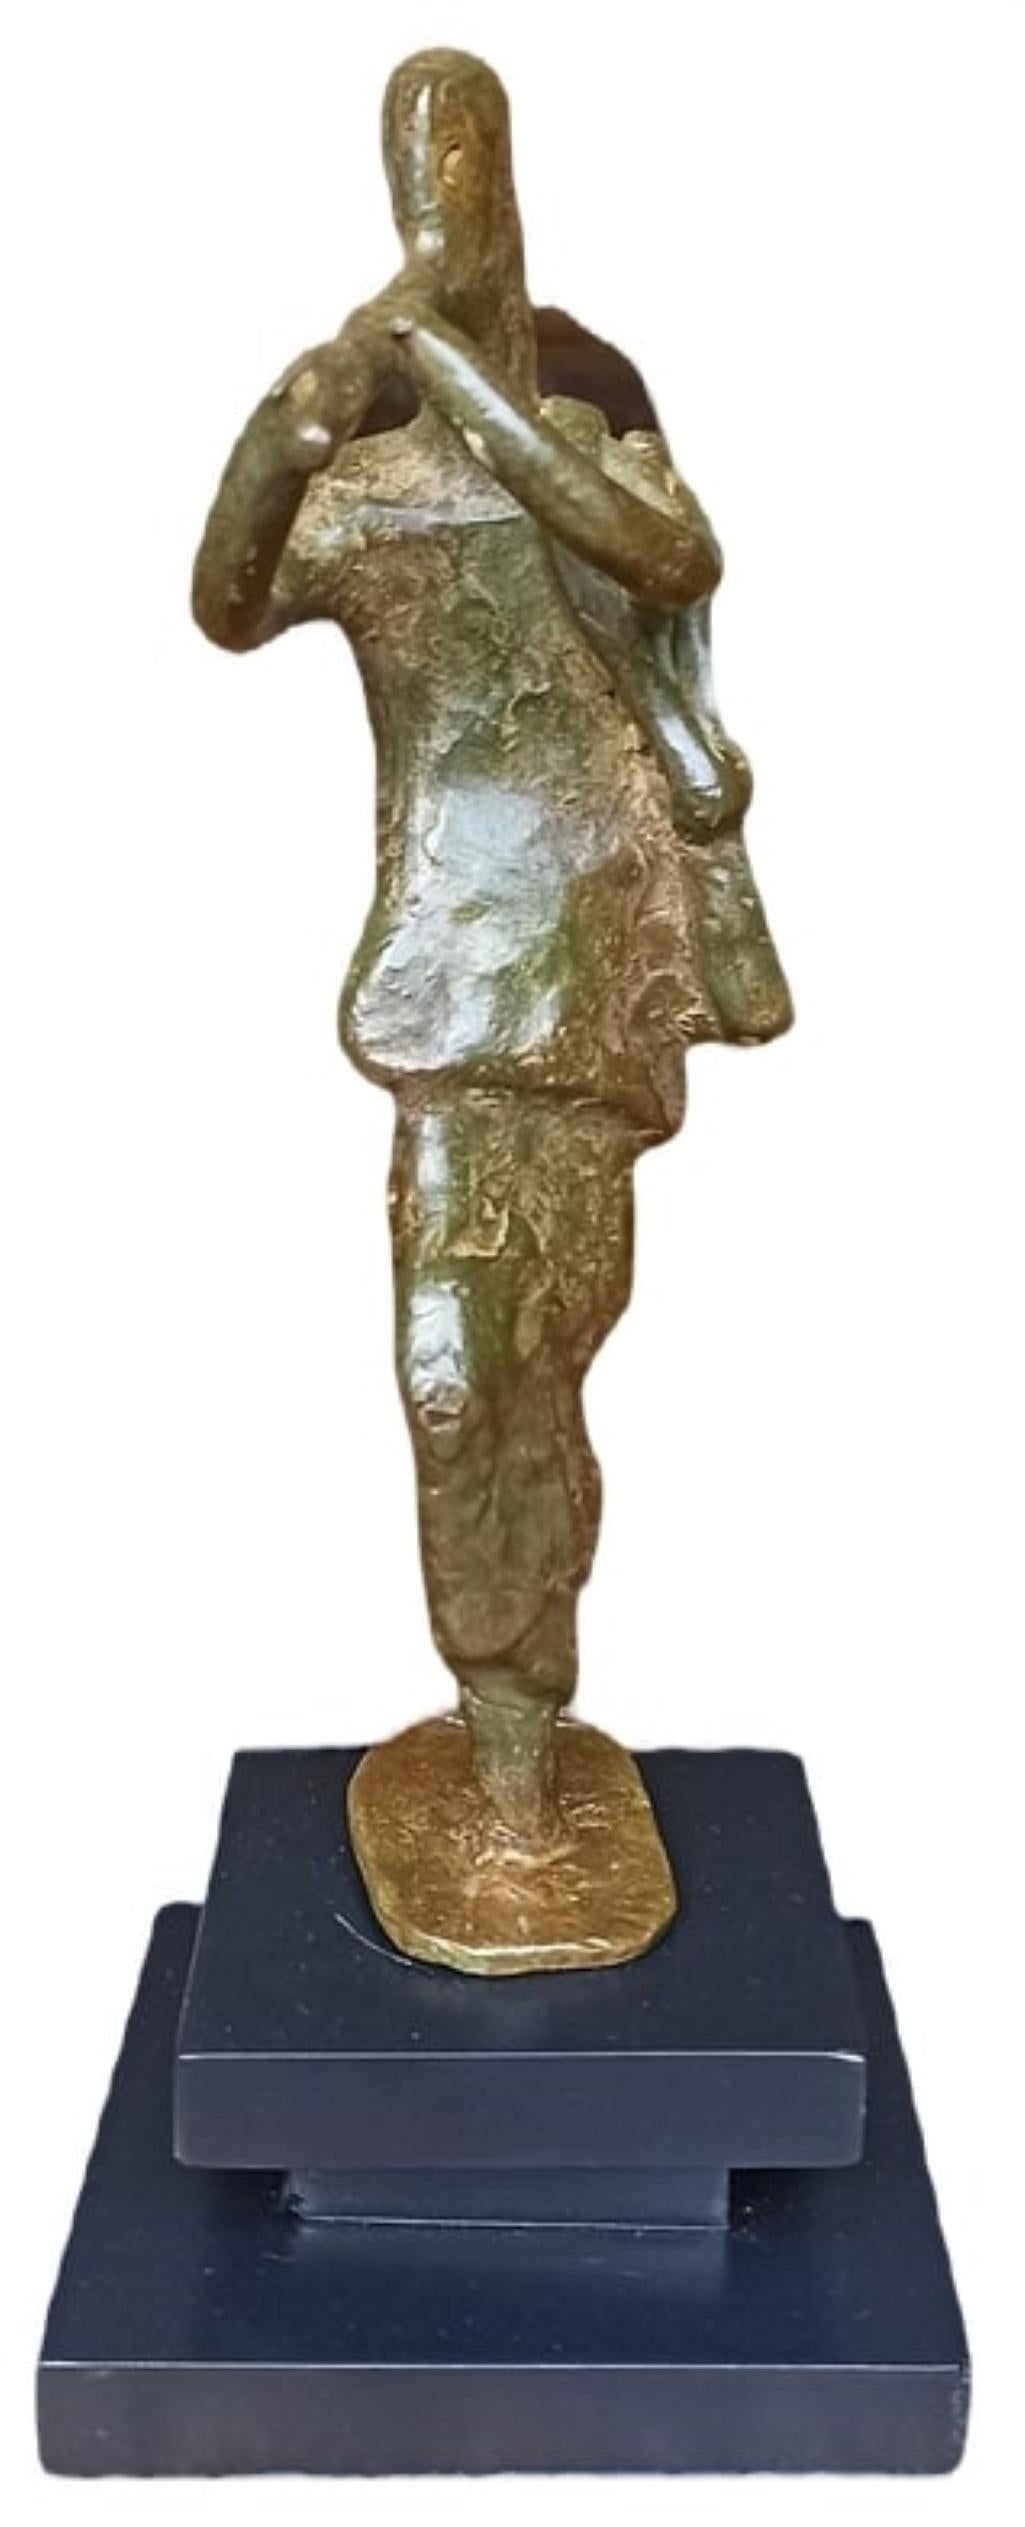 Tushar Kanti Das Roy Figurative Sculpture - Playing Flute, Bronze Sculpture, Figurative by Contemporary Artist “In Stock”